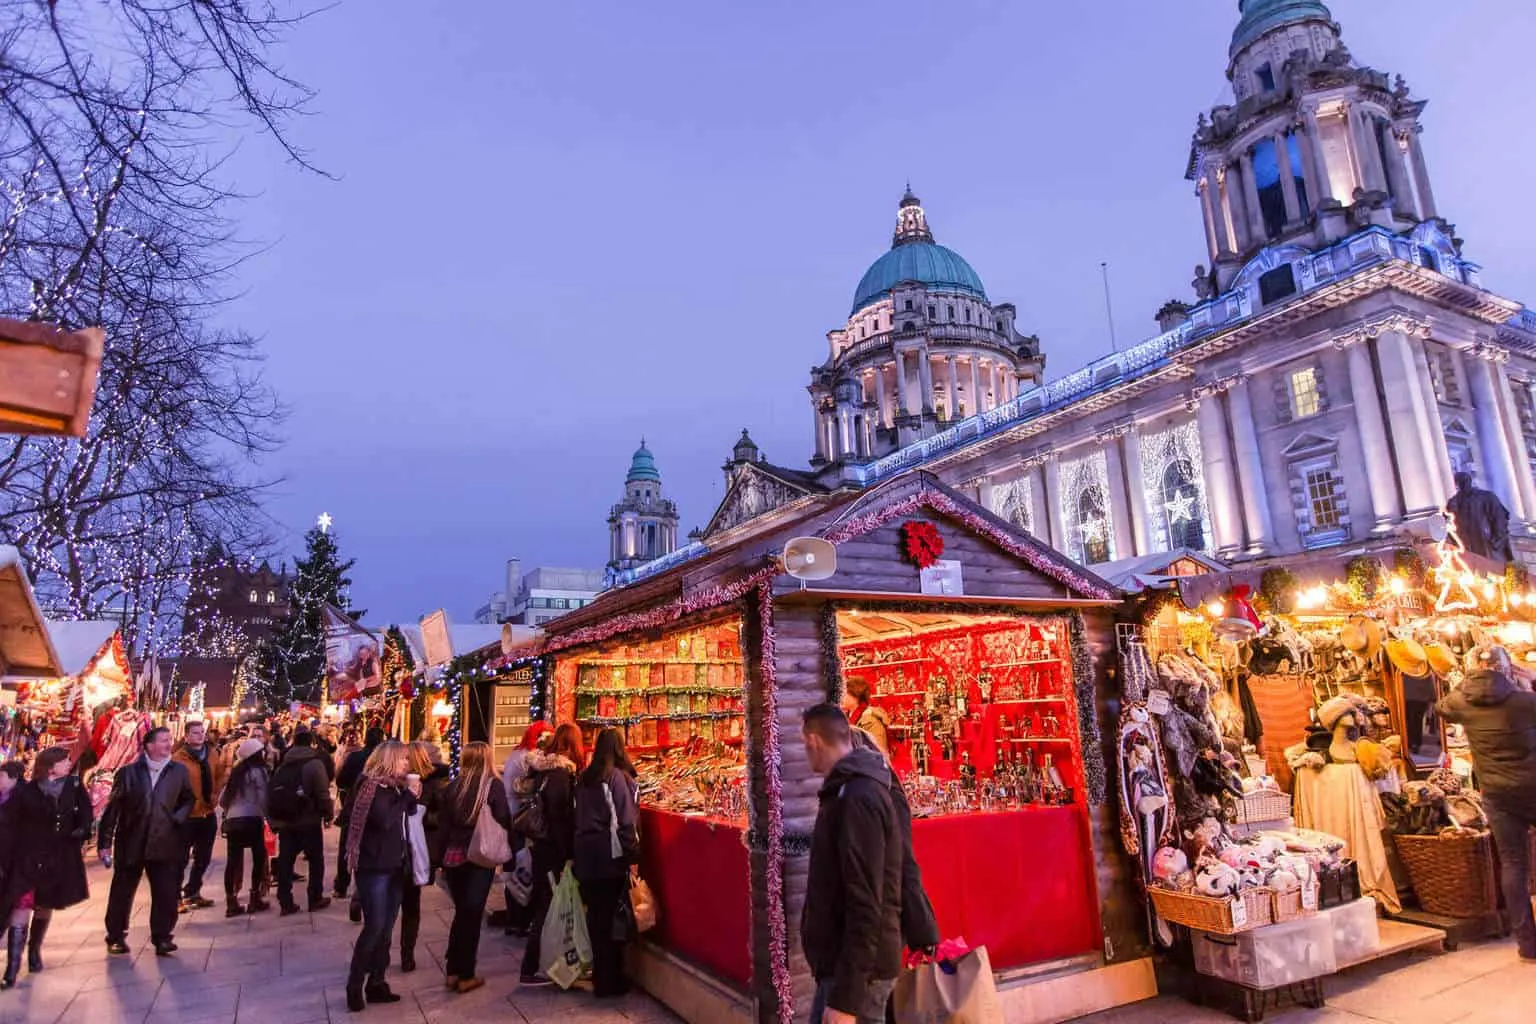 The beautiful Christmas Market just outside of City Hall in Belfast, Northern Ireland. 